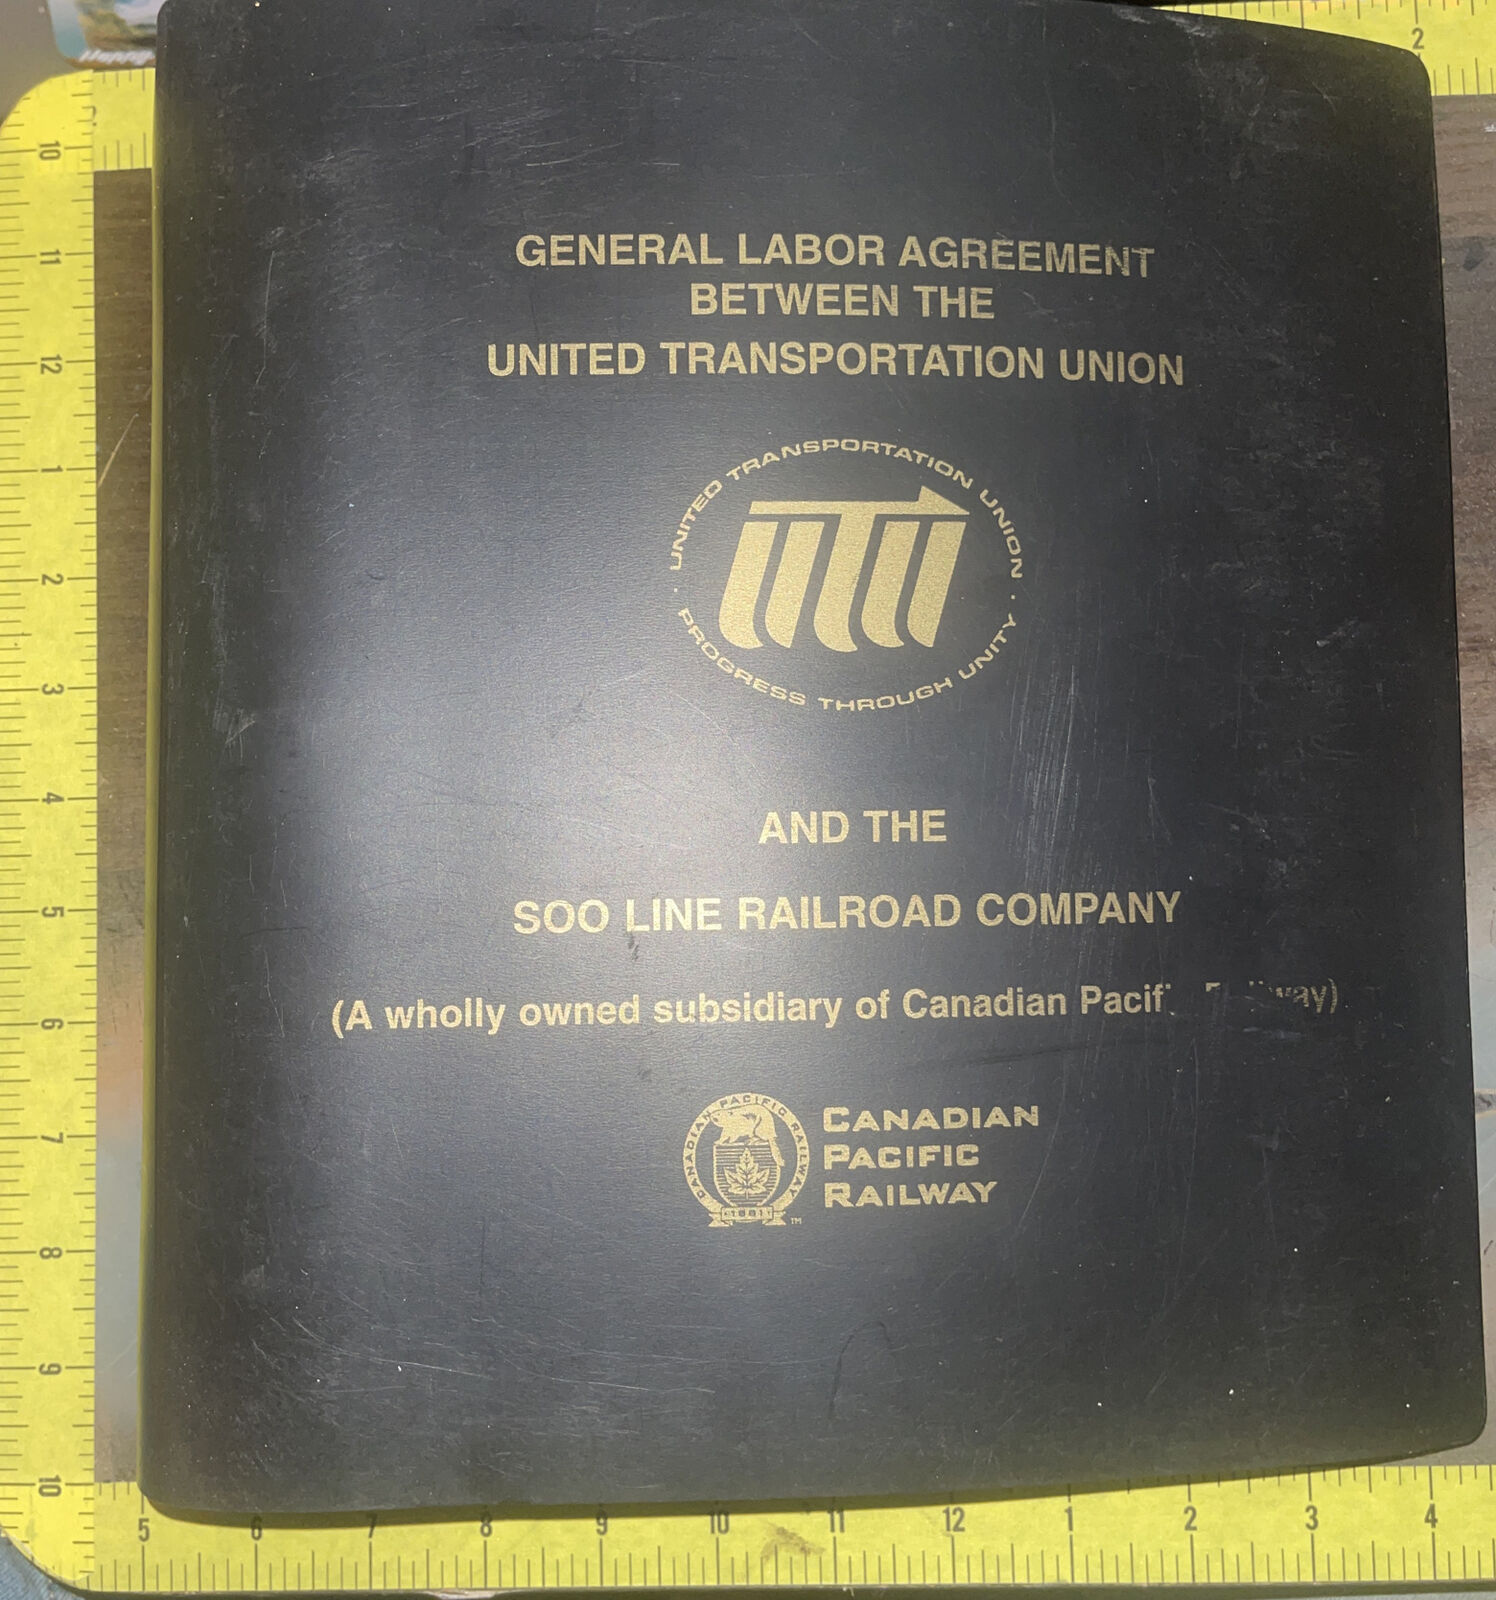 2001 General Labor Agreement Between United Transportation Union and SOO Line